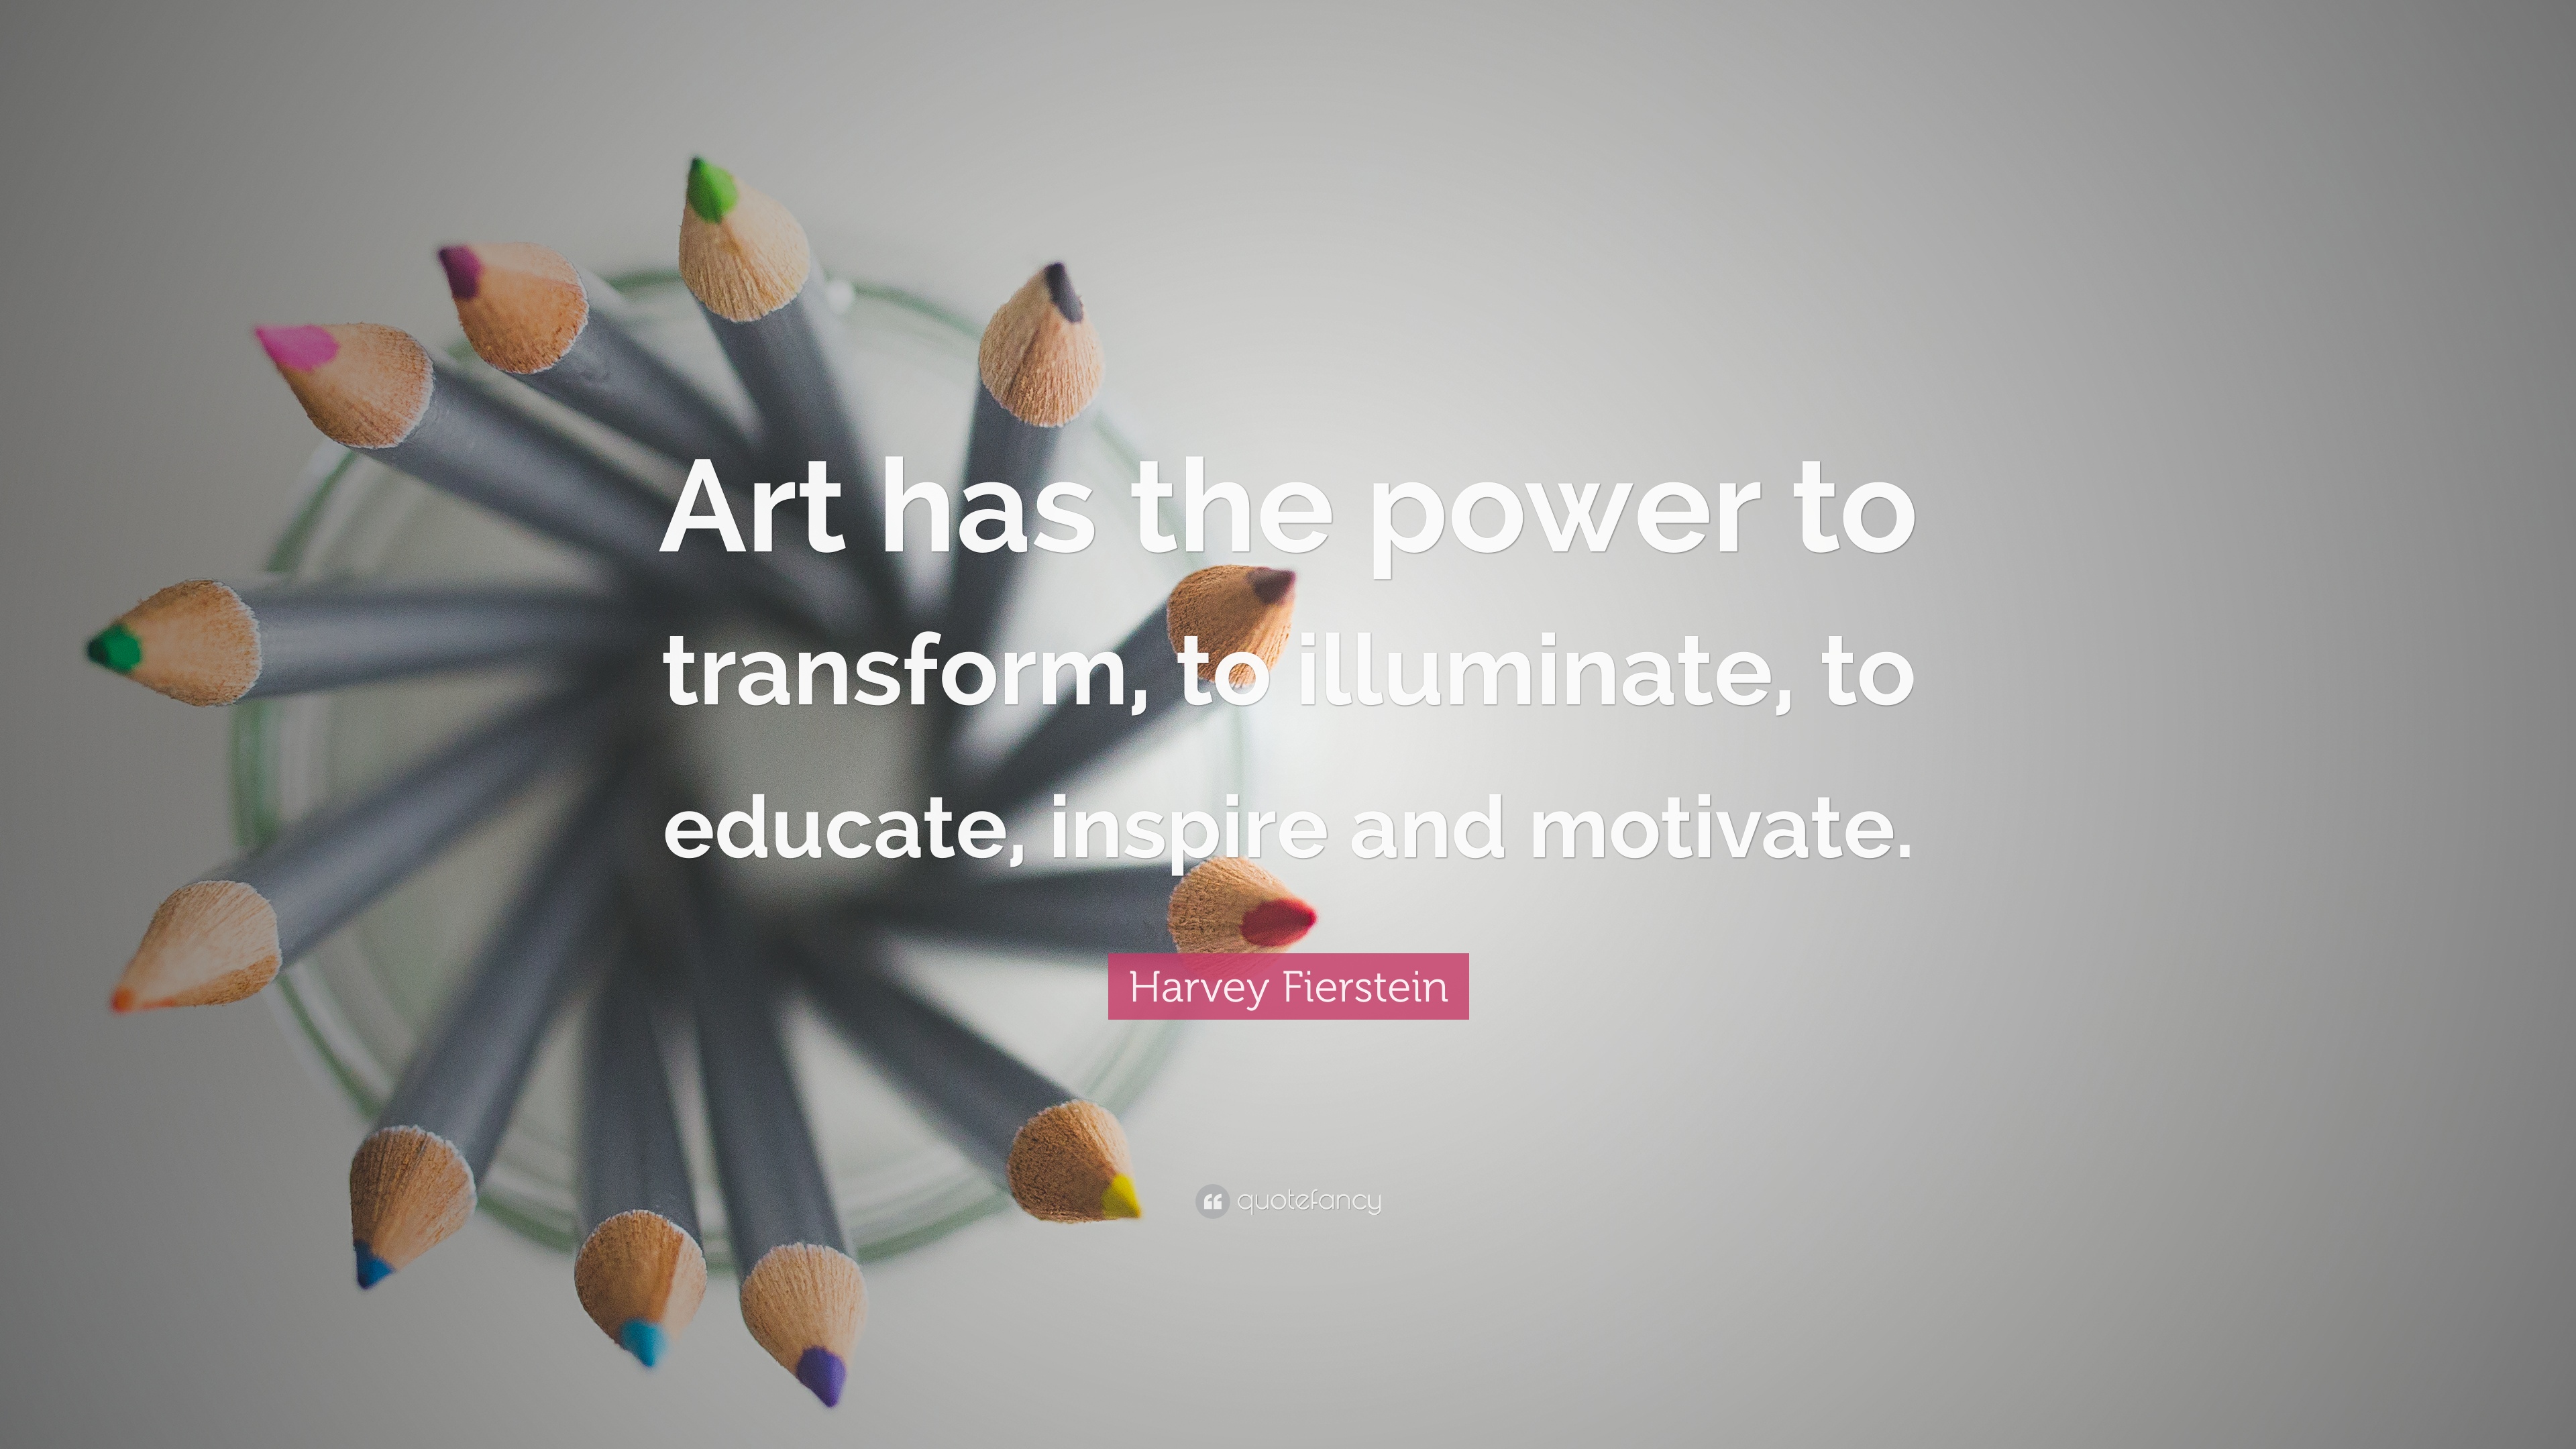 Harvey Fierstein Quote: “Art has the power to transform, to